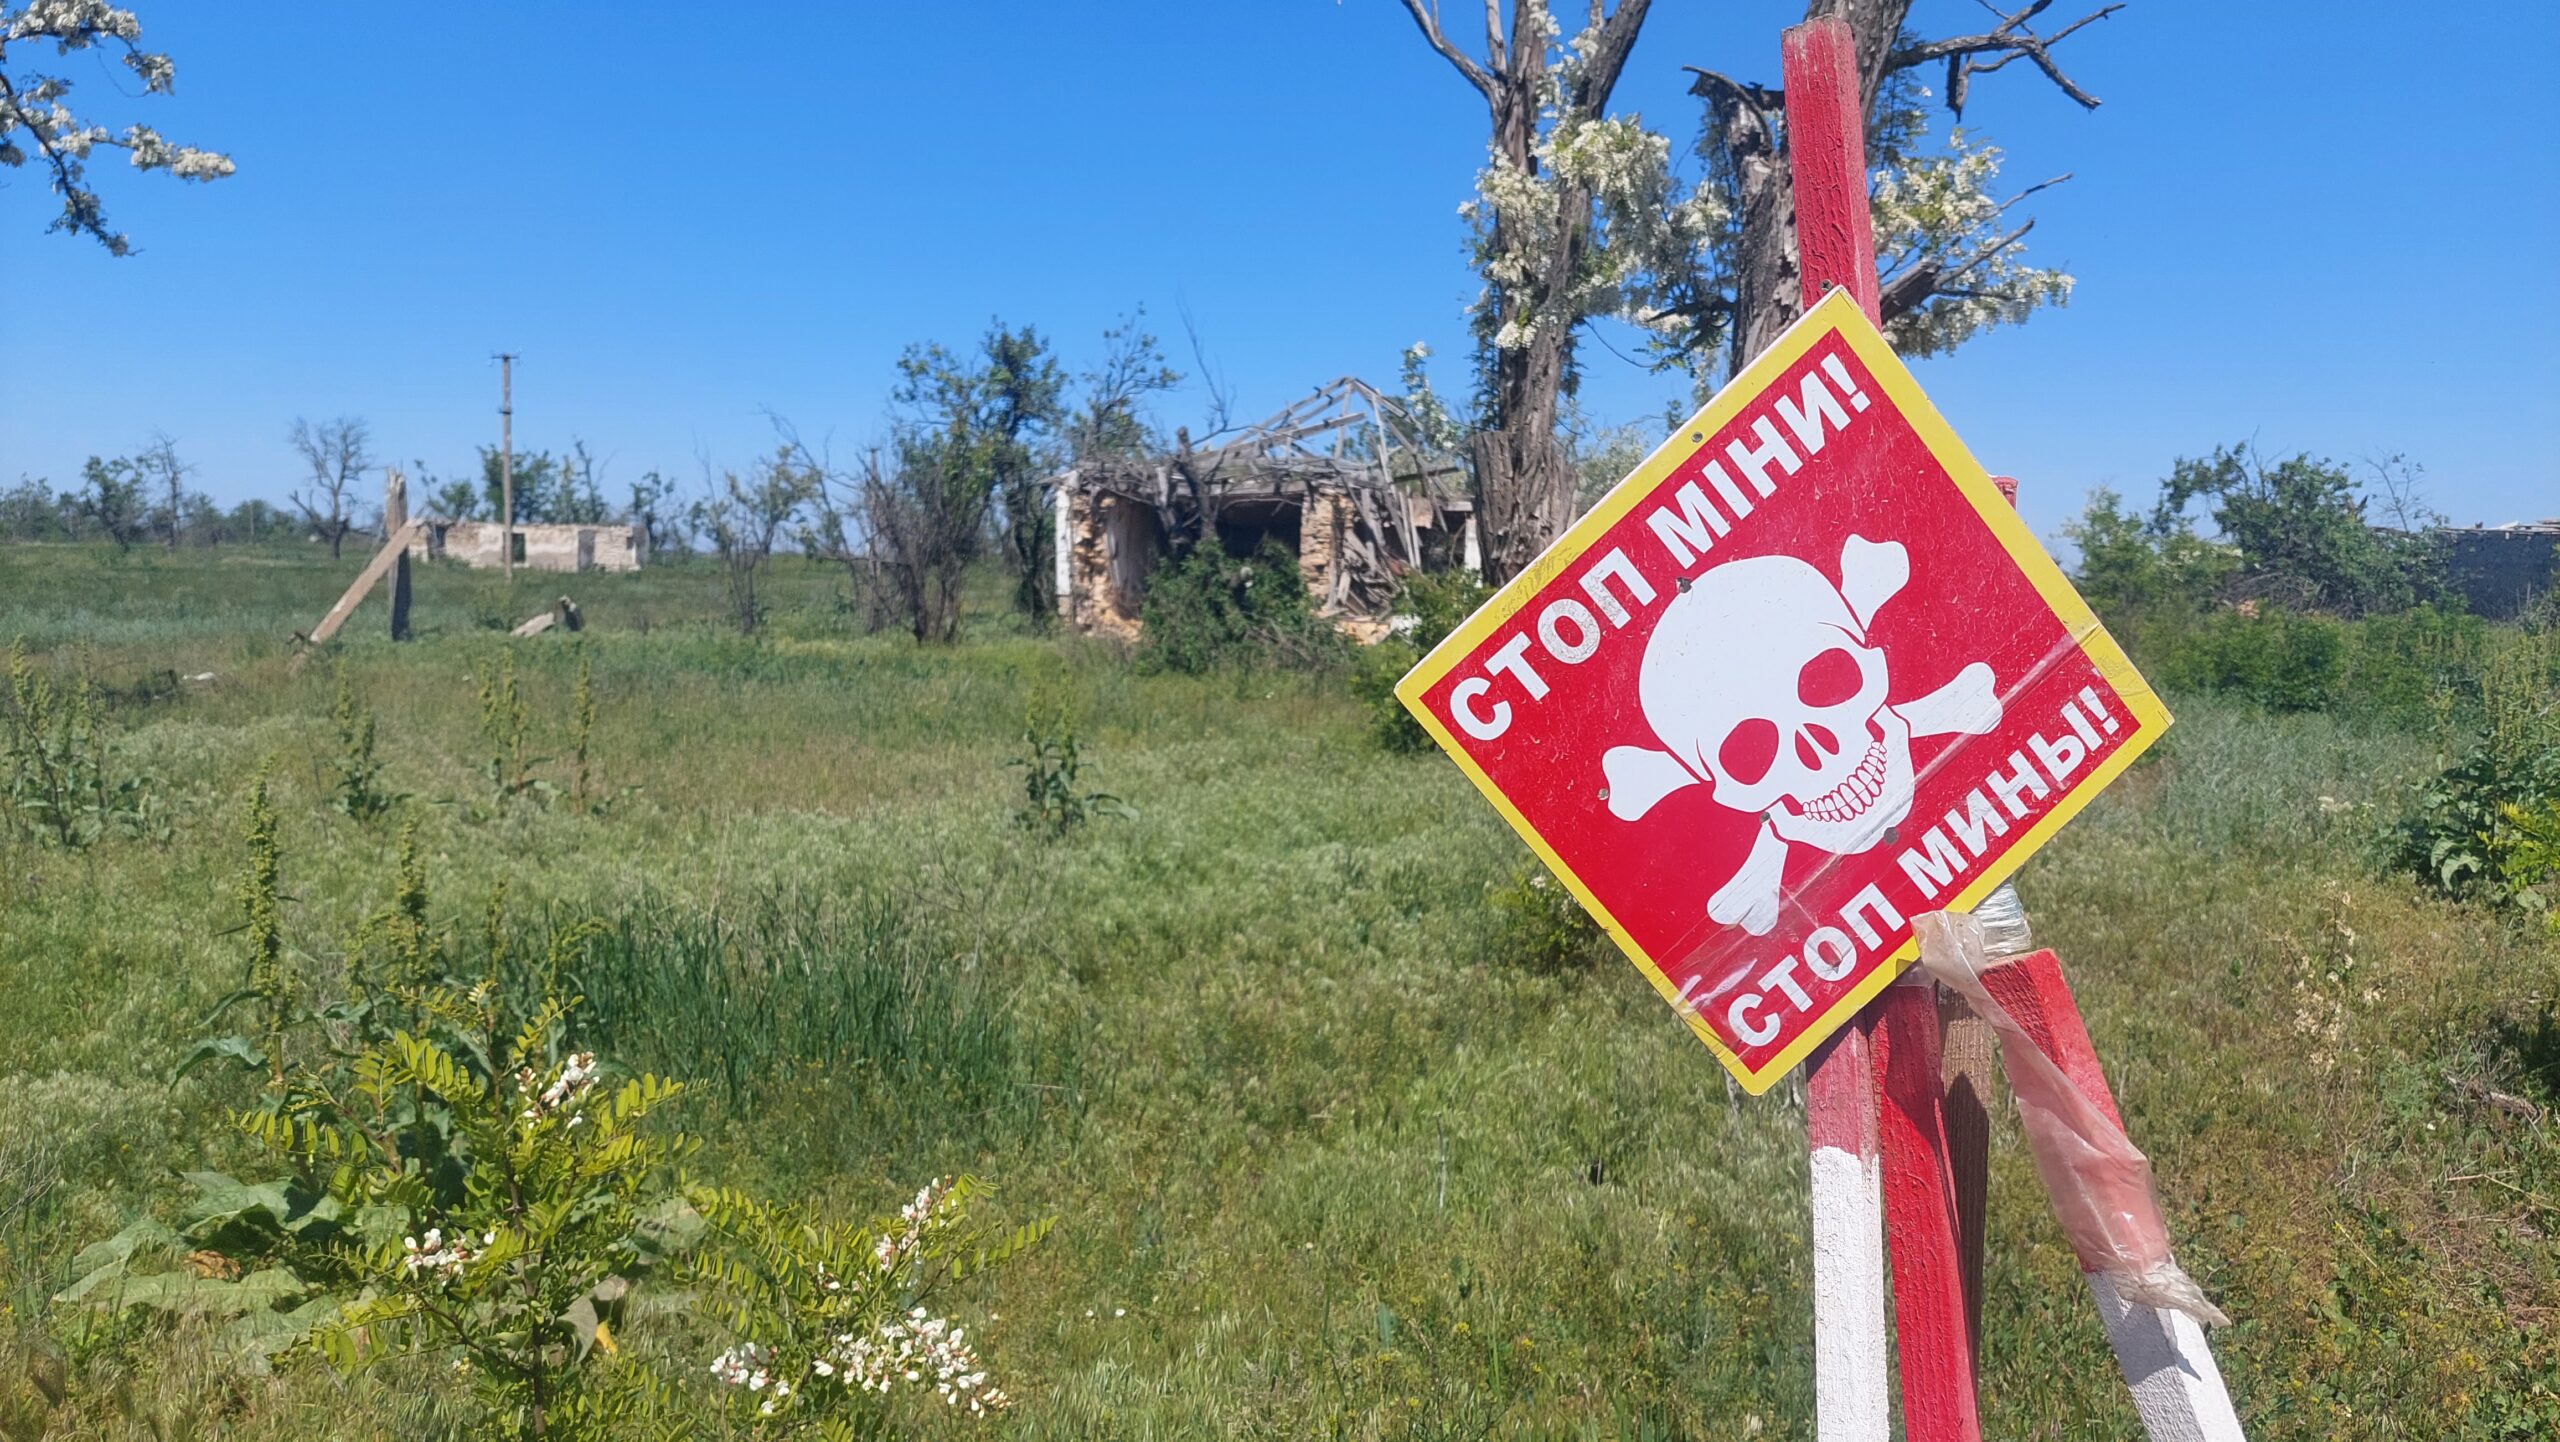 Ukraine/Russia: Investigate use of anti-personnel mines left after Russian occupation as possible war crimes